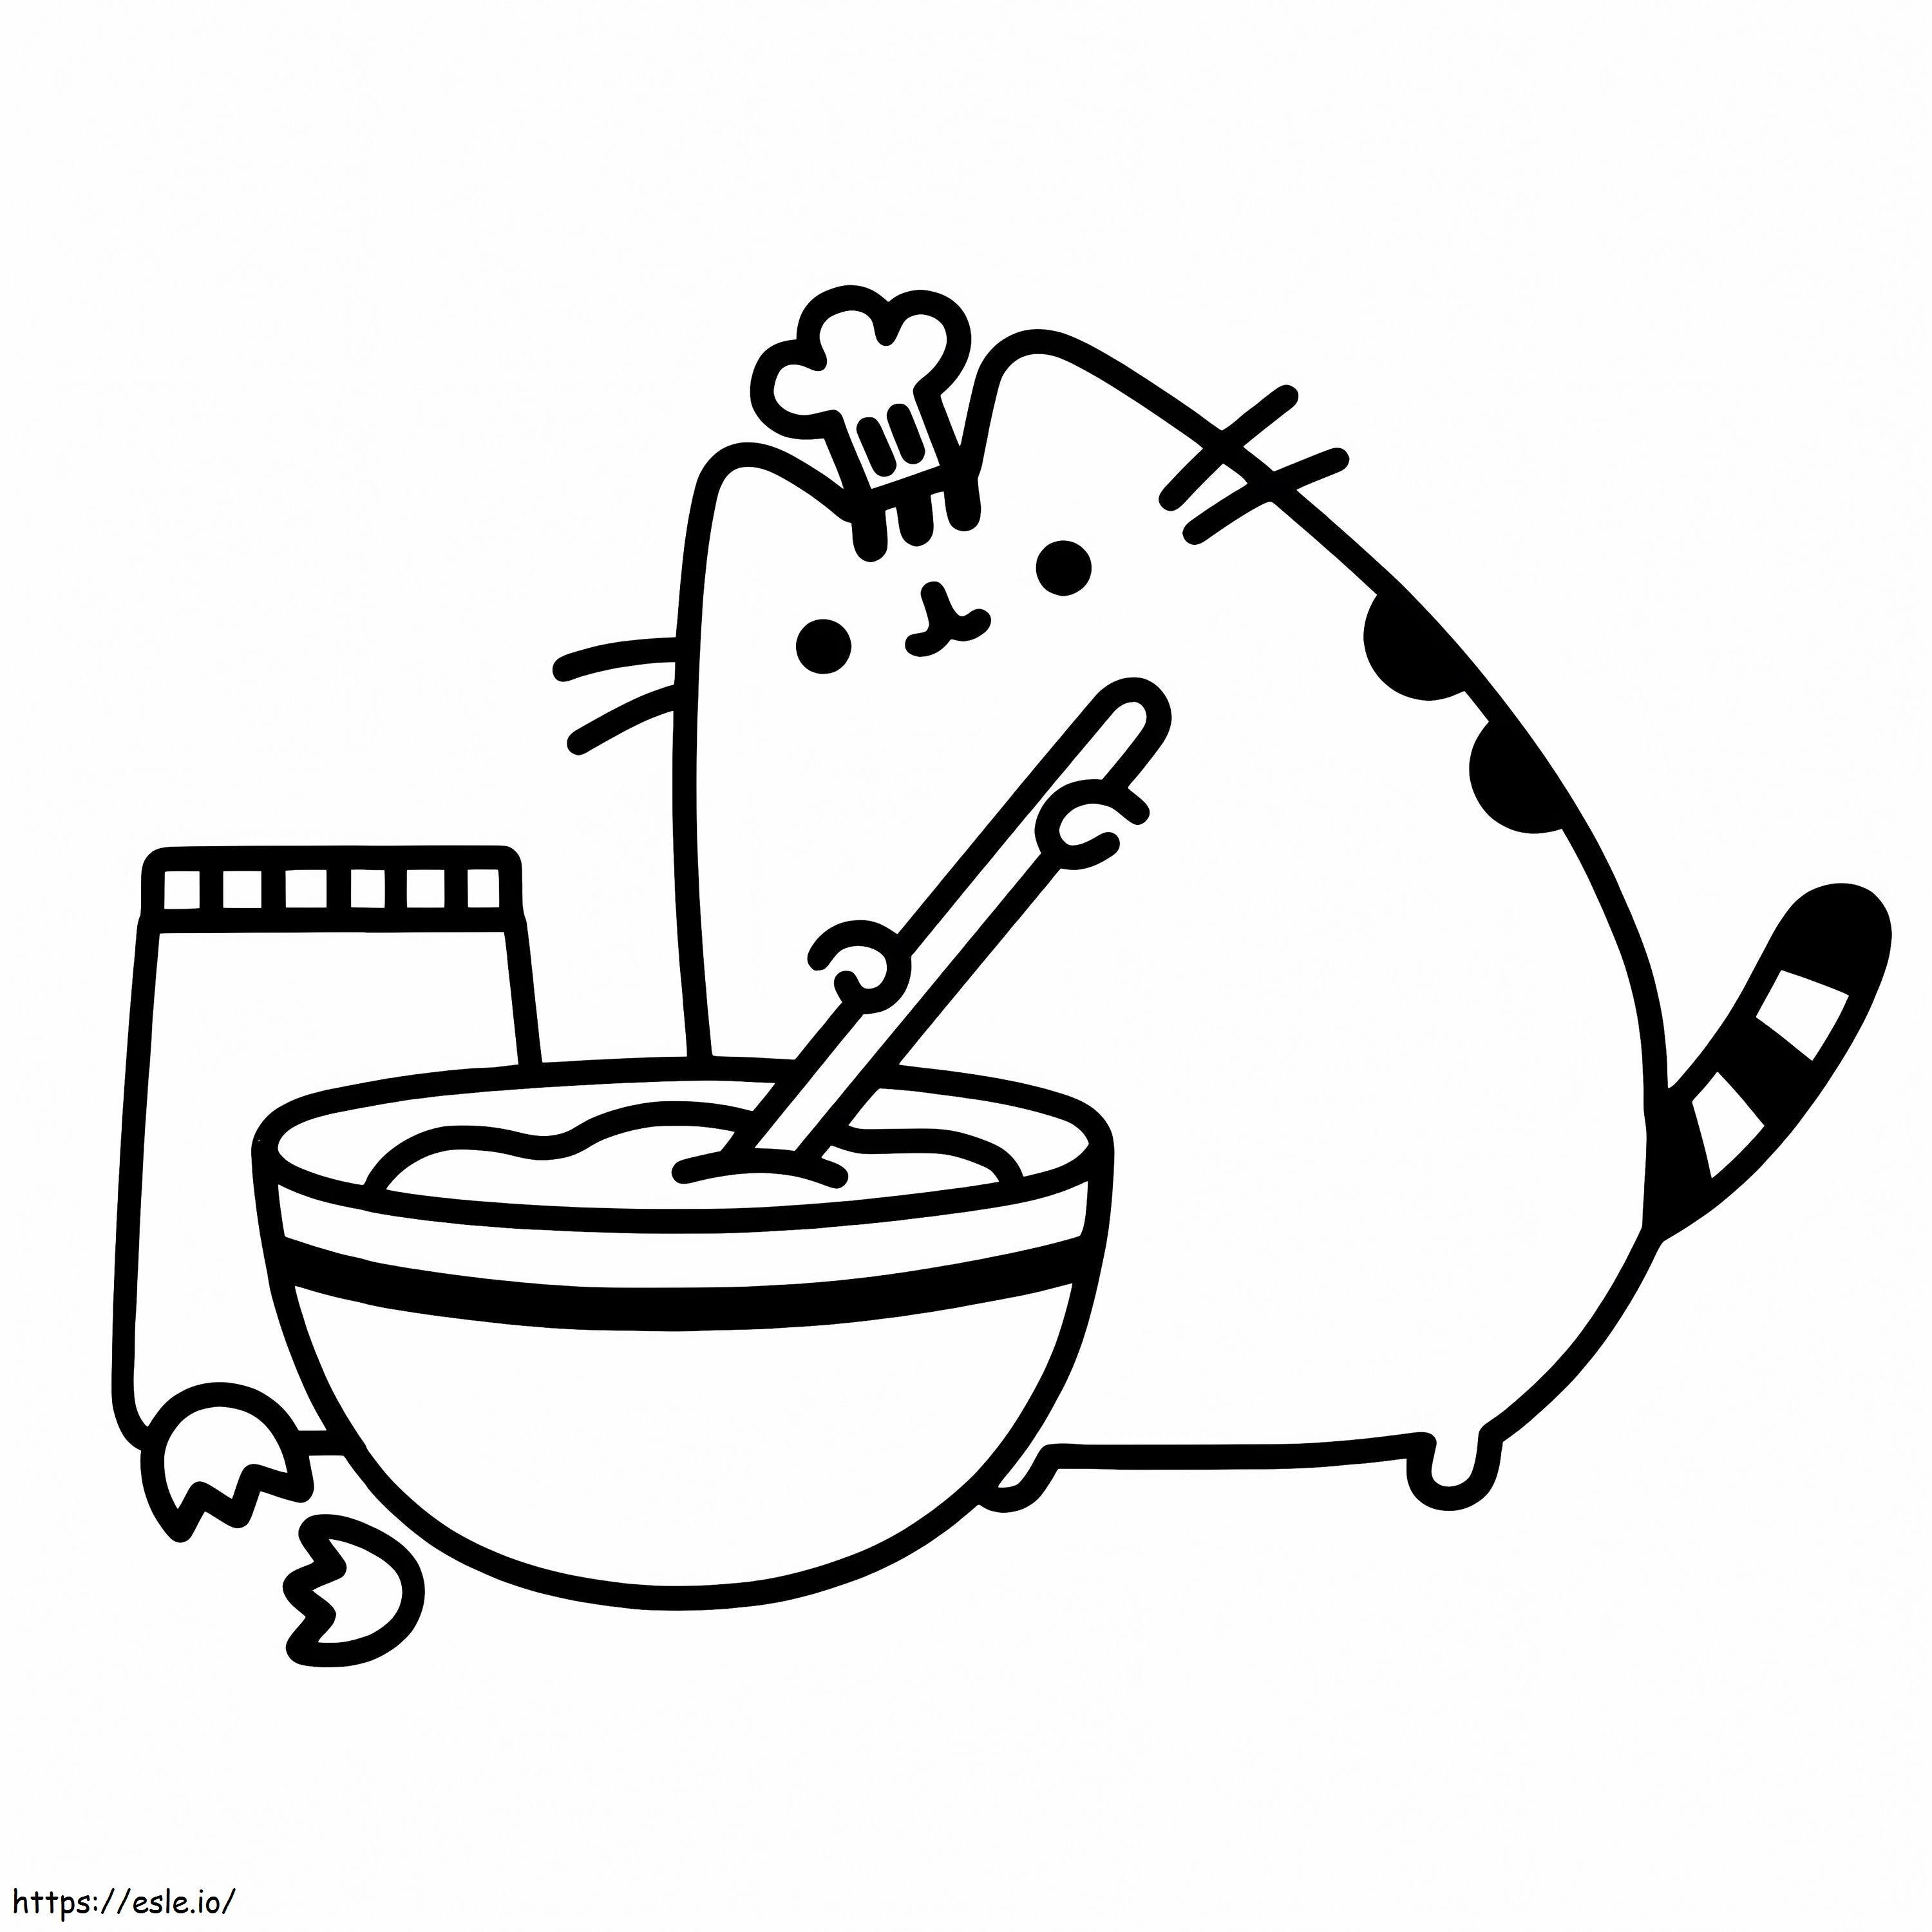 1541489425 Pusheen 0017 Cooking coloring page